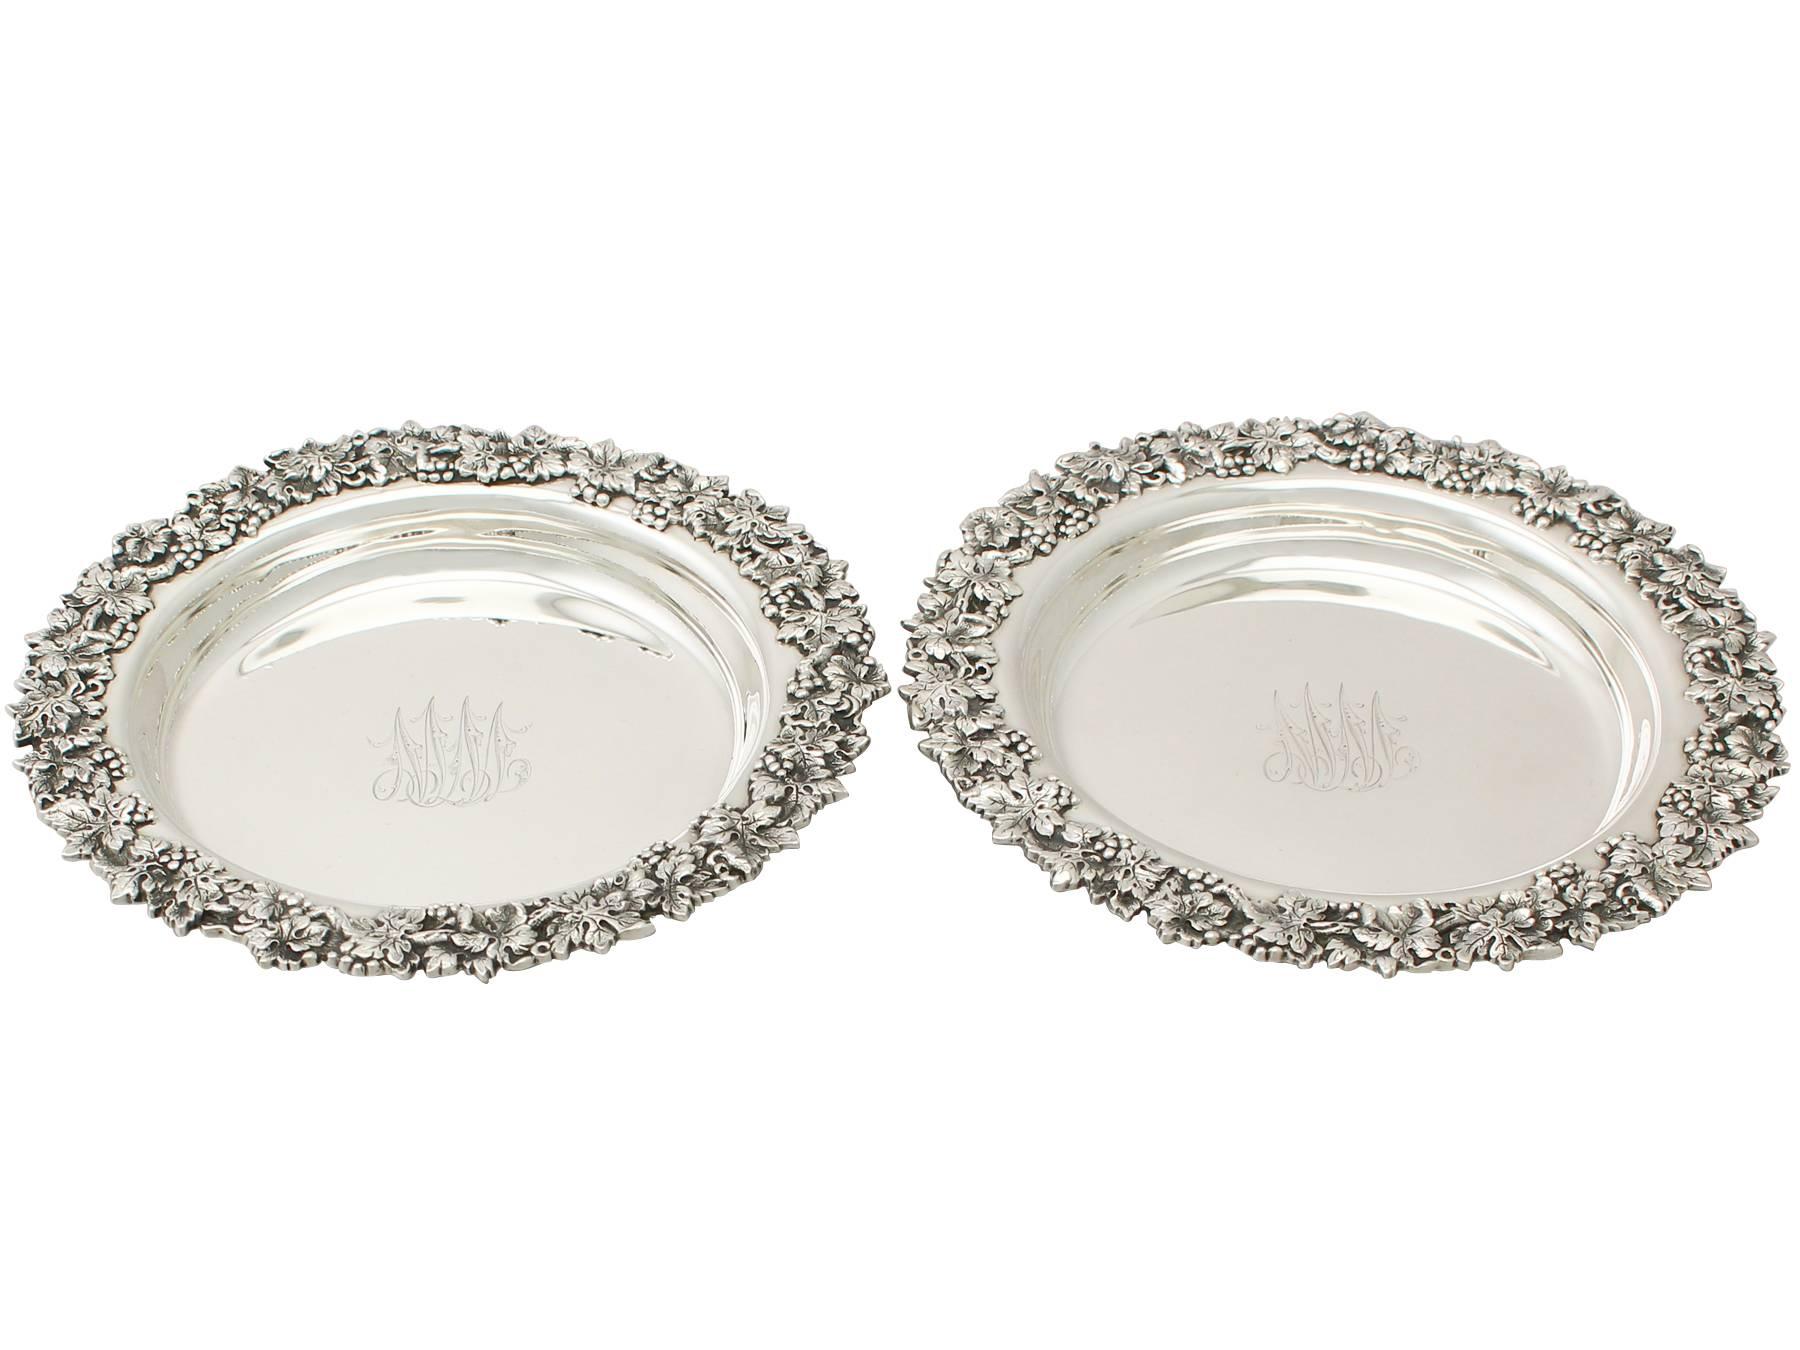 An exceptional, fine and impressive pair of antique American sterling silver coasters; an addition to our range of wine and drink related silverware.

These exceptional antique sterling silver wine coasters have a circular rounded form.

The